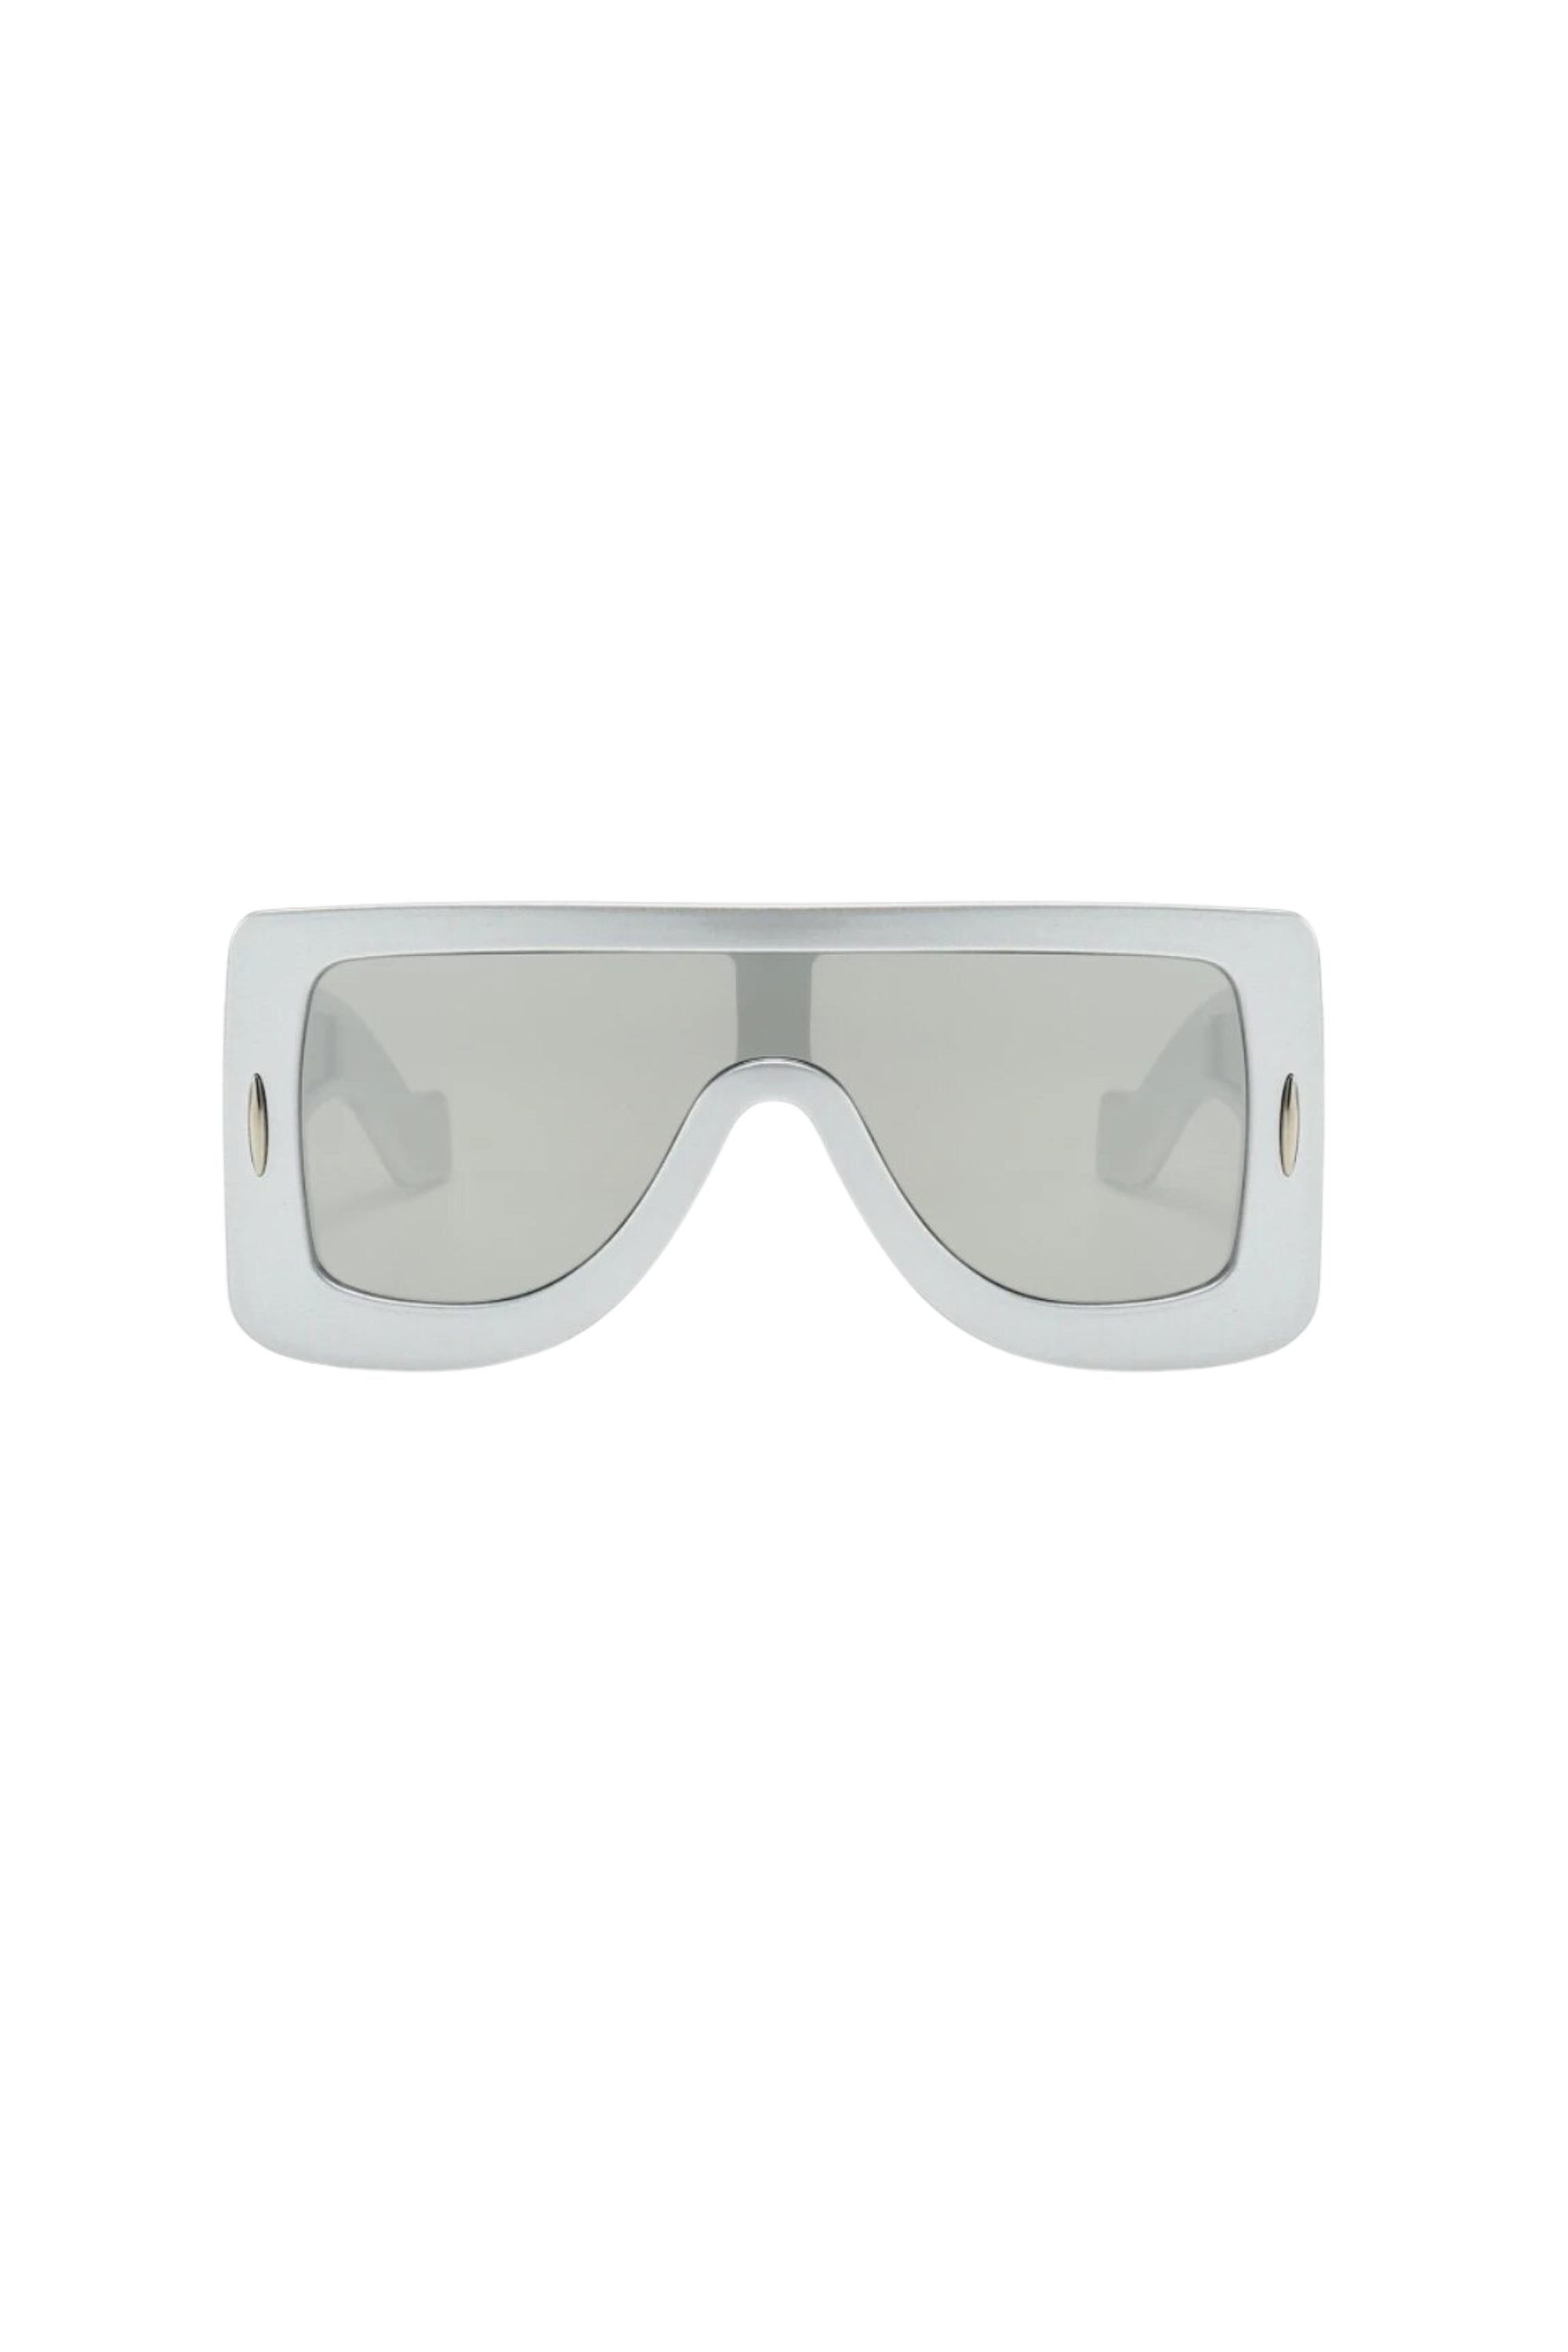 GOLDxTEAL modern silver oversized square frame sunglasses.